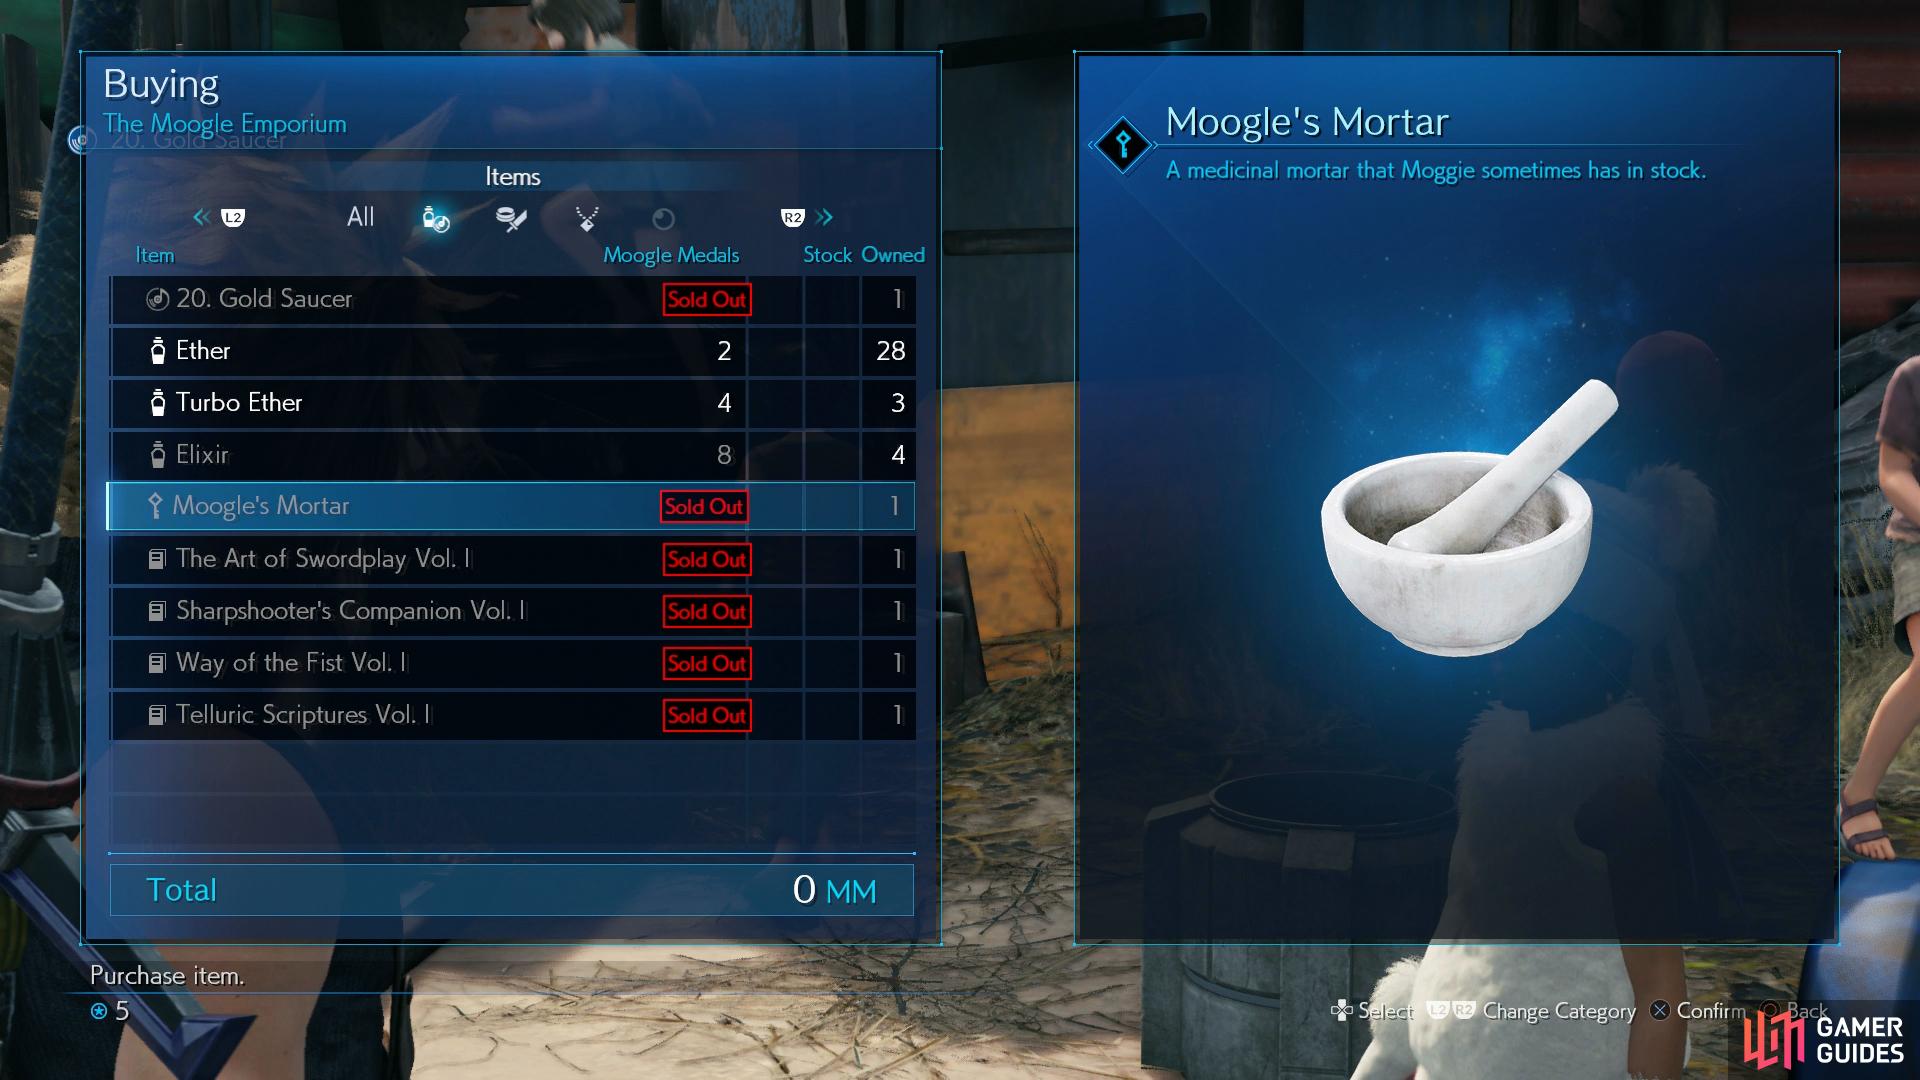 You can purchase the Moogle's Mortar from the Moogle Emporium for 1MM